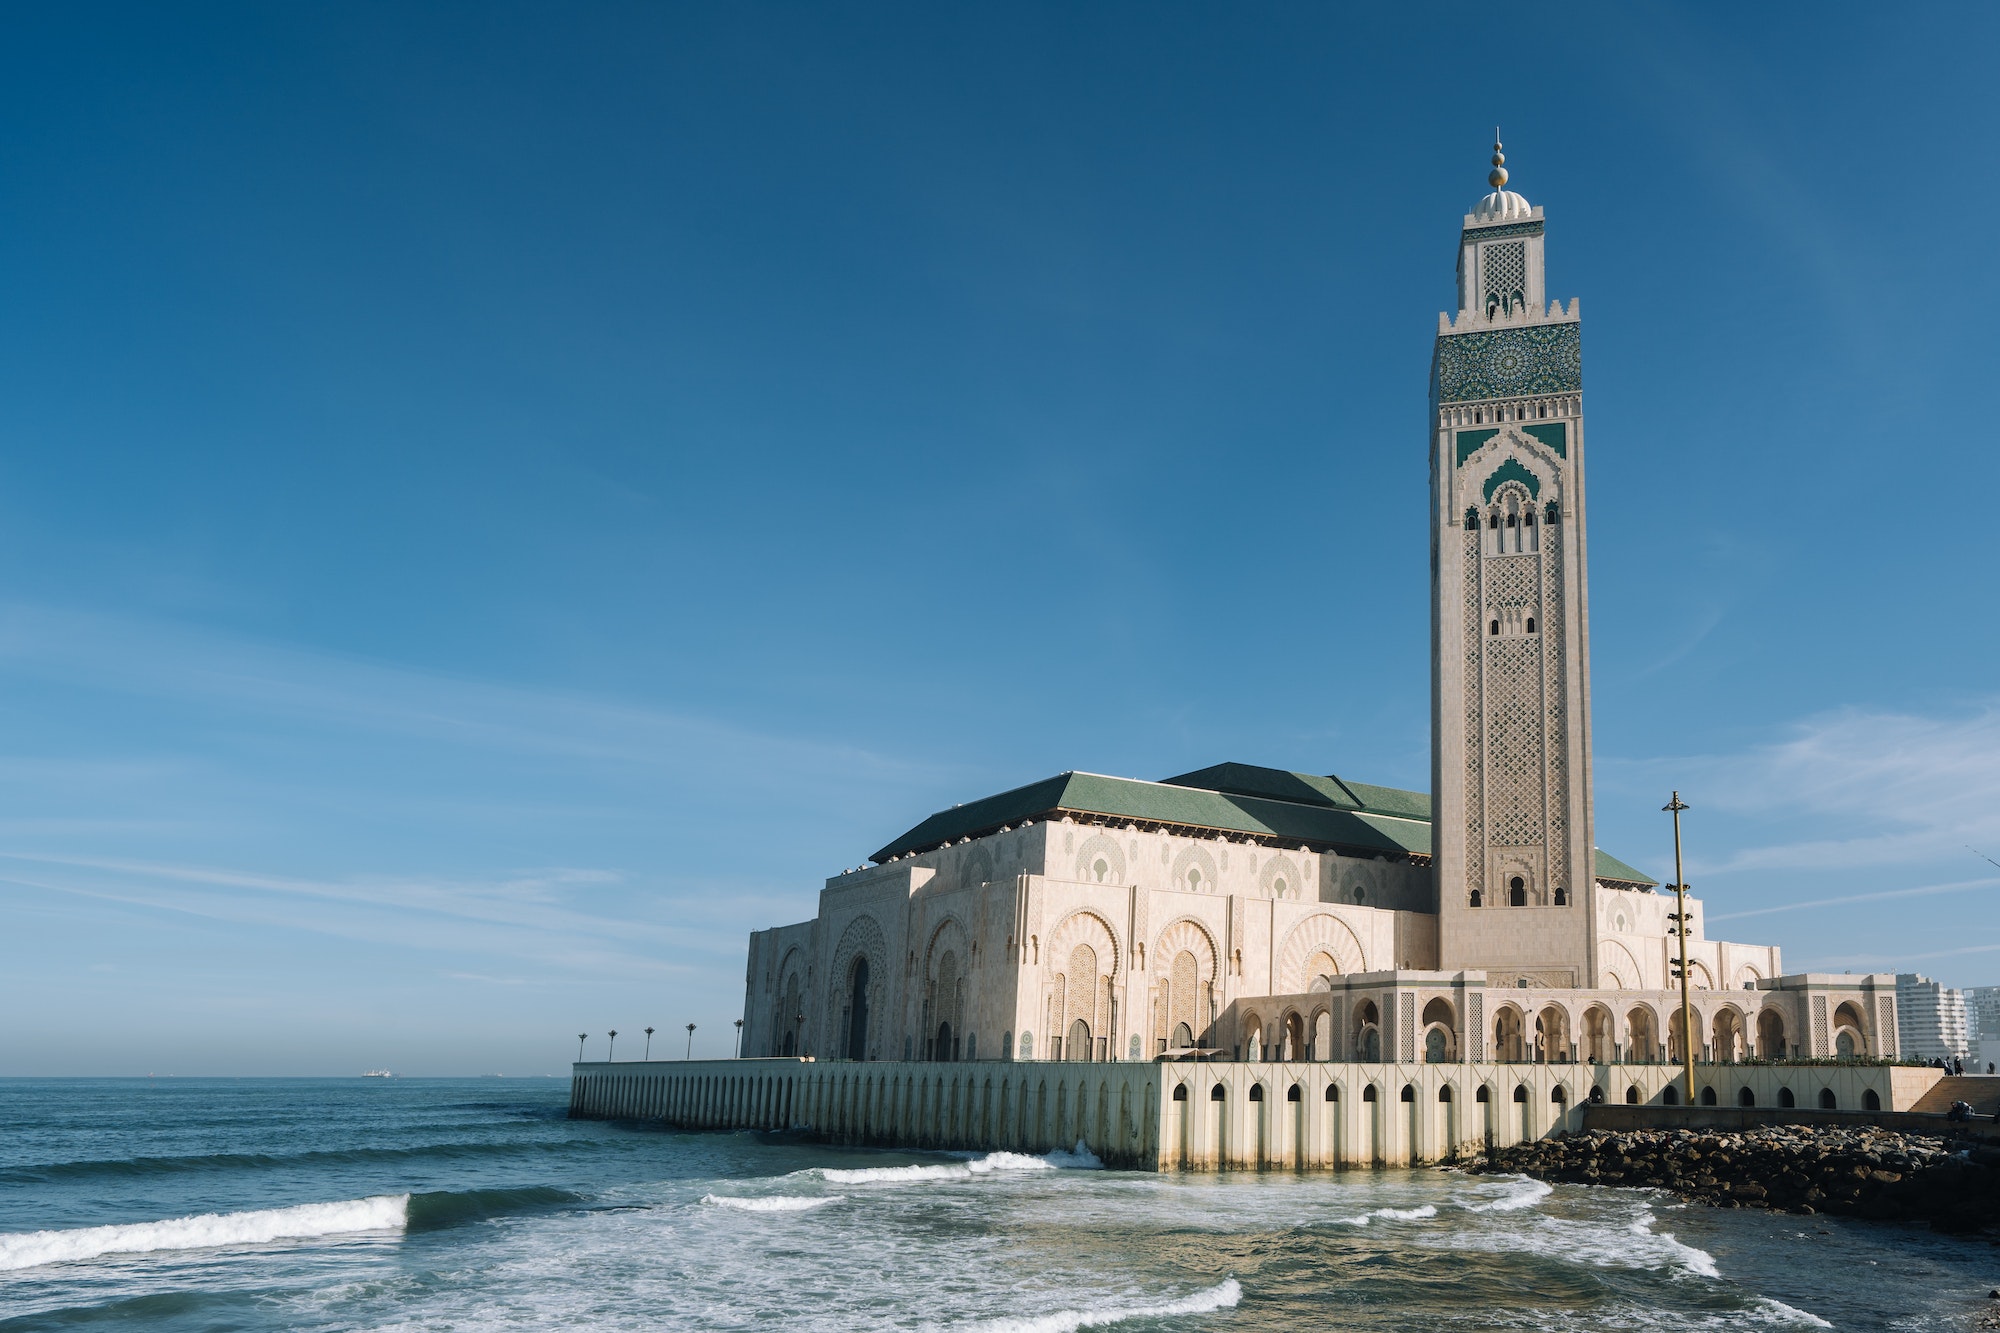 Hassan II Mosque surrounded by water and buildings under a blue sky and sunlight